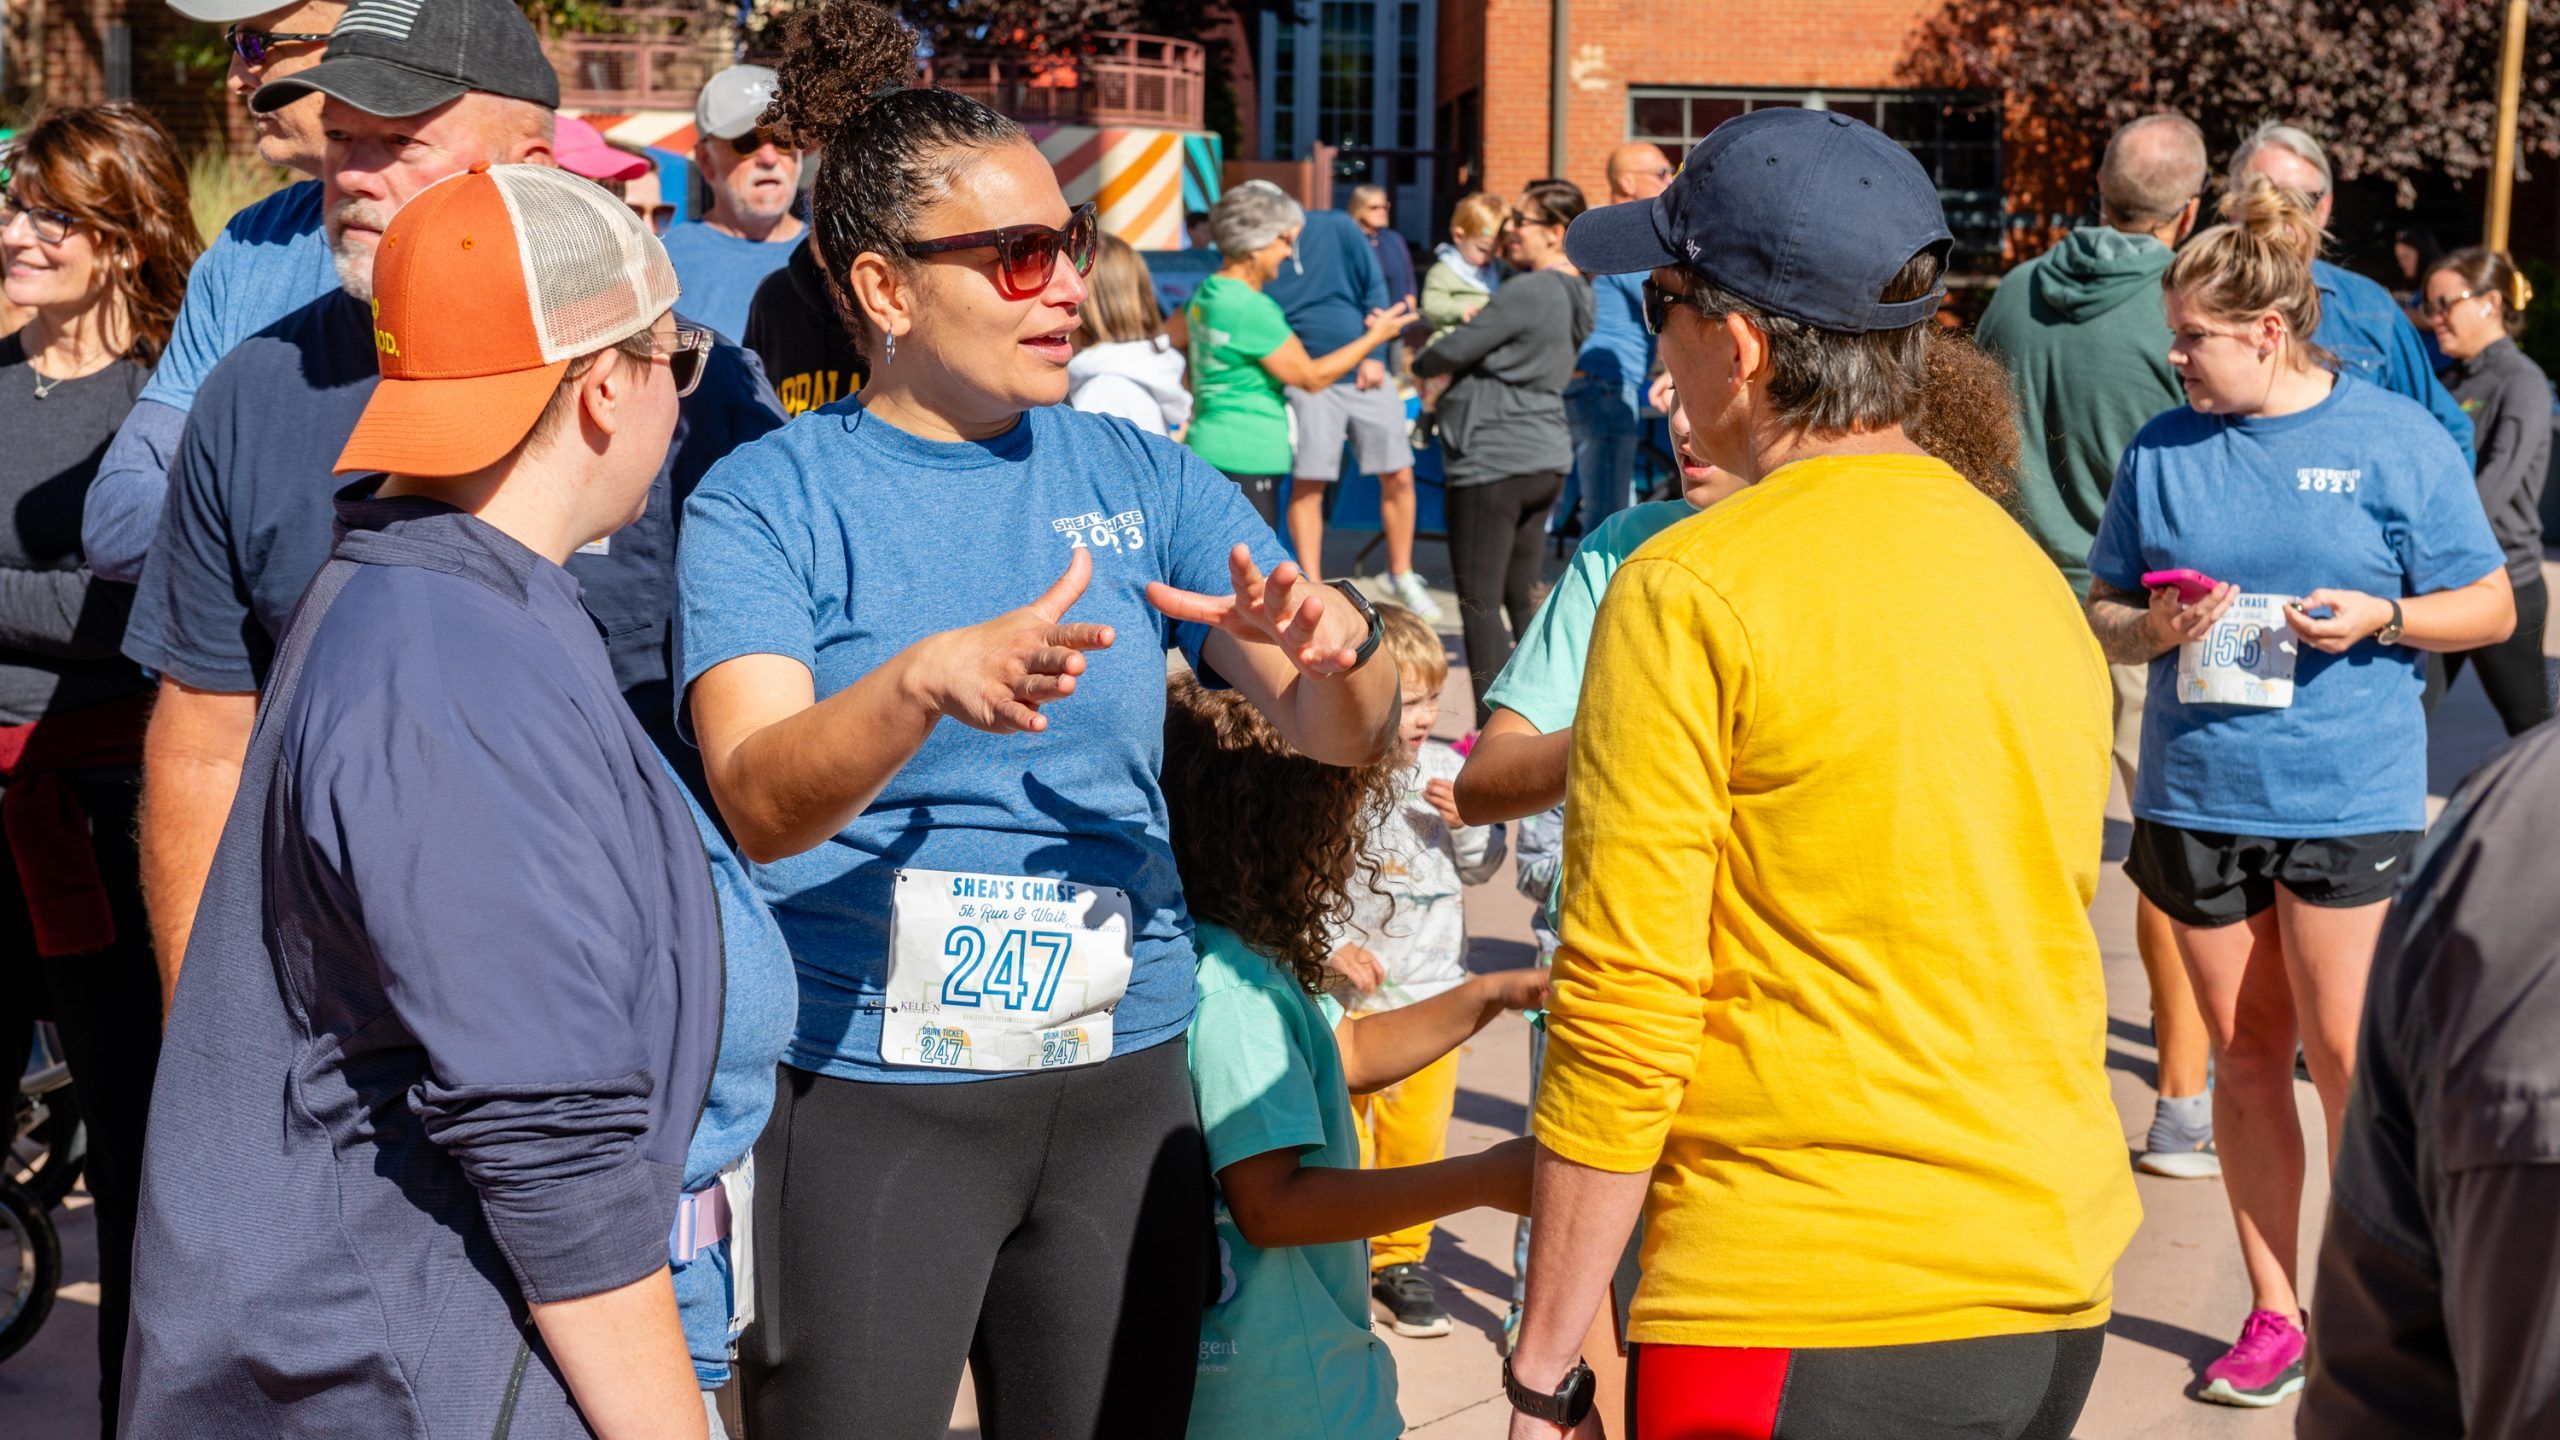 Gayle Rose and other associates participate in Shea's Chase 5k to support Guilford mental health services